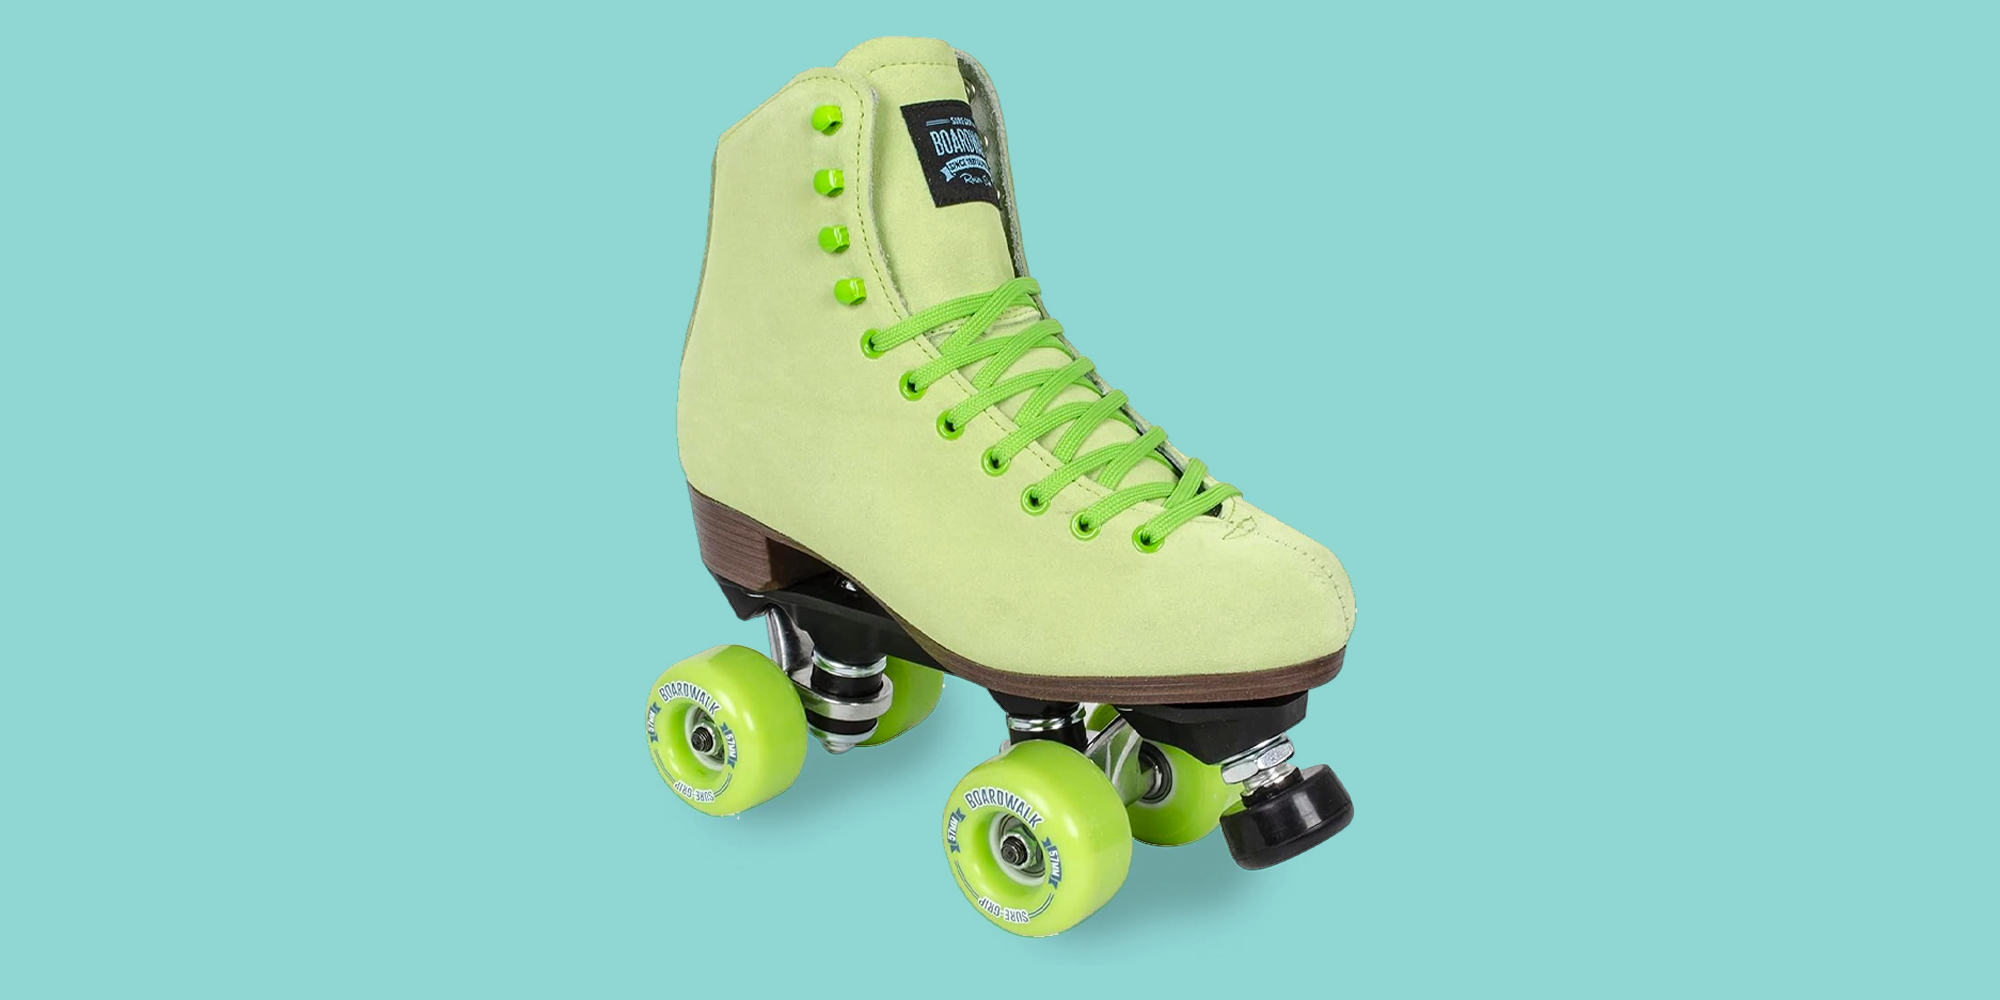 Should You Go Roller Skating With Your Dog?